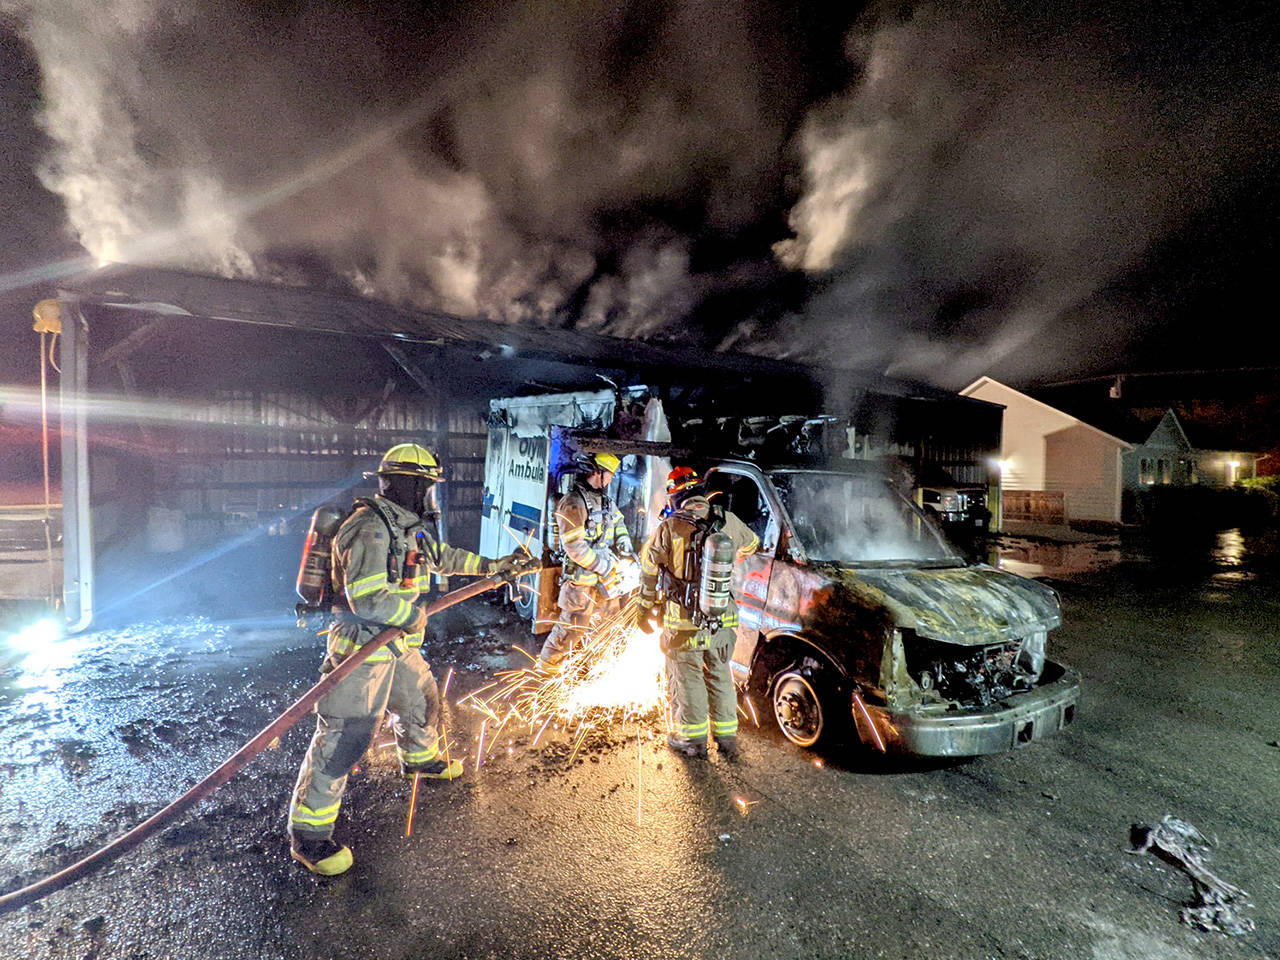 Firefighters respond to an early morning fire at Olympic Ambulance early Tuesday. (Clallam County Fire District 3)